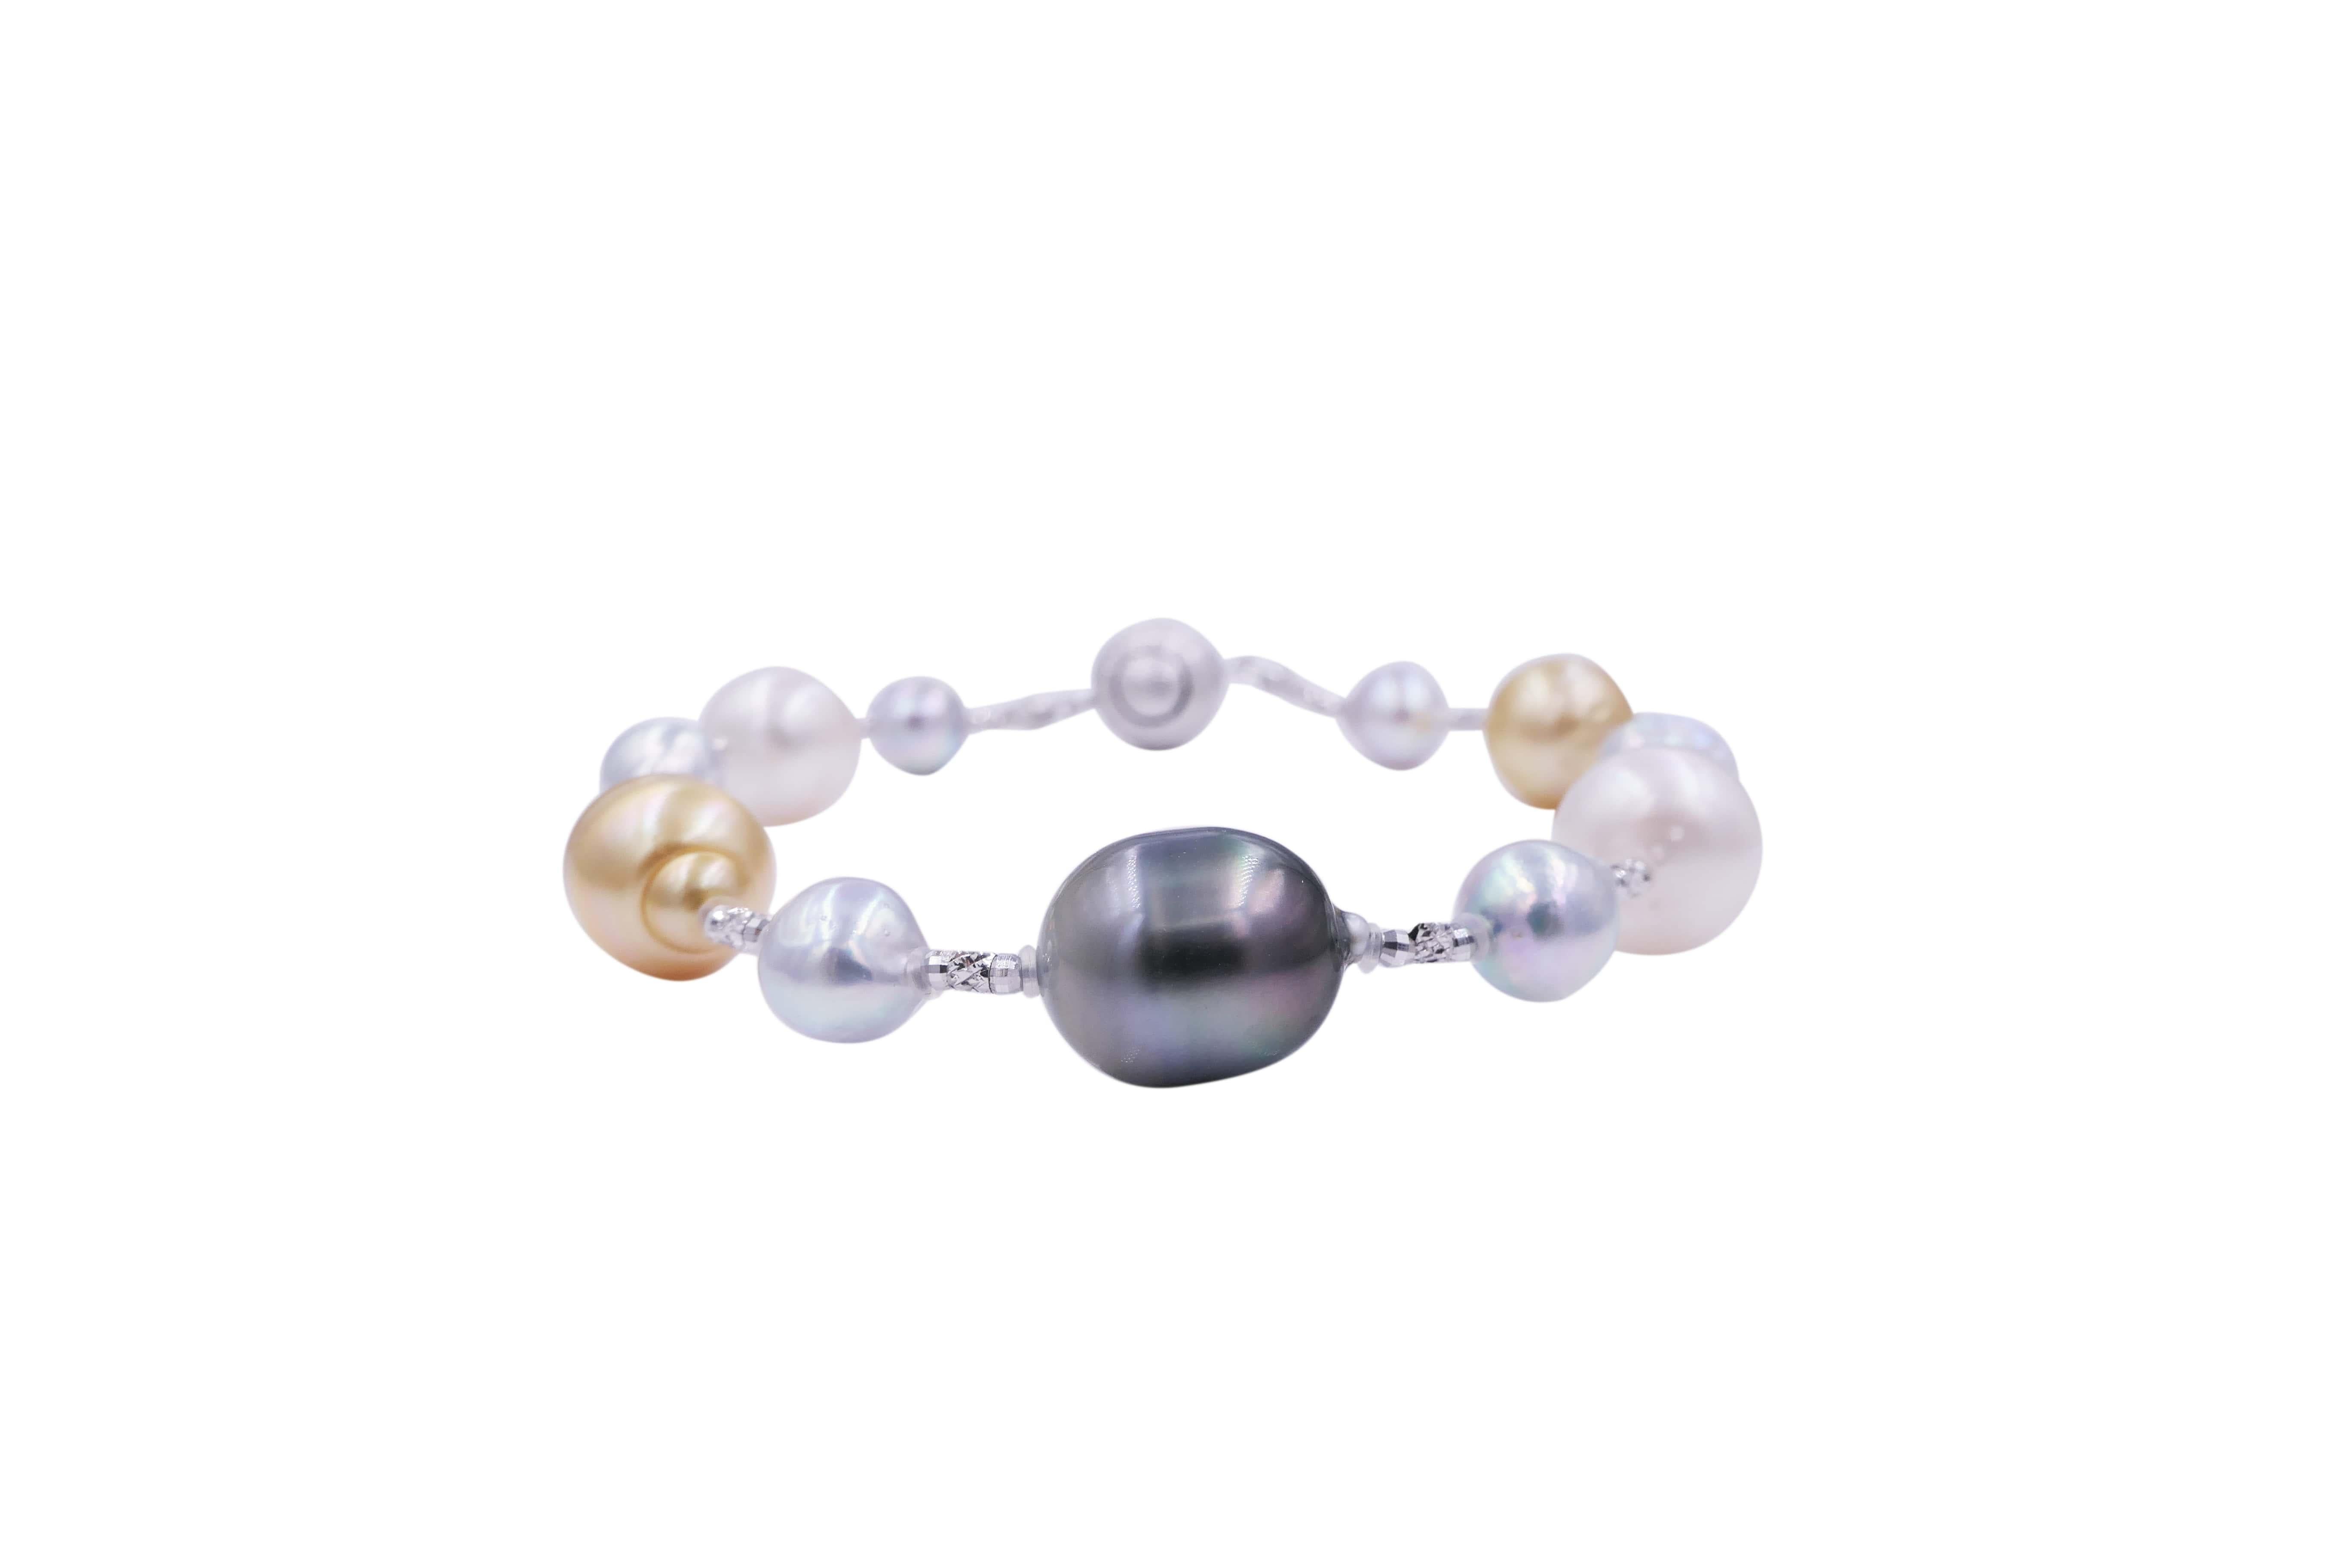 Yellow White South Sea Tahitian Pearls Gold Adjustable Lariat Necklace Bracelet For Sale 7